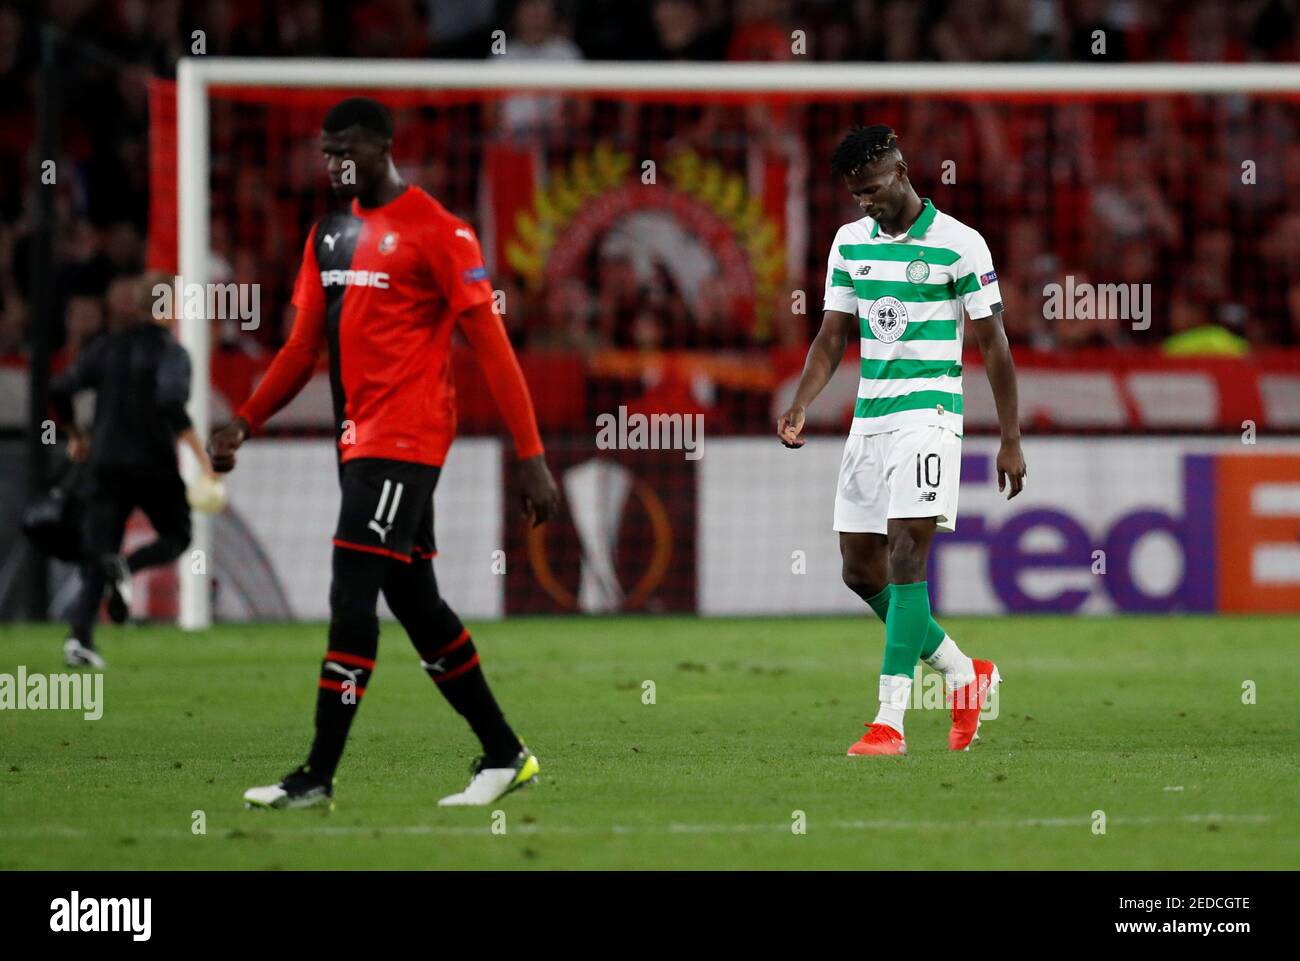 Soccer Football - Europa League - Group E - Stade Rennes v Celtic - Roazhon  Park, Rennes, France - September 19, 2019 Celtic's Vakoun Issouf Bayo  leaves the pitch after he is